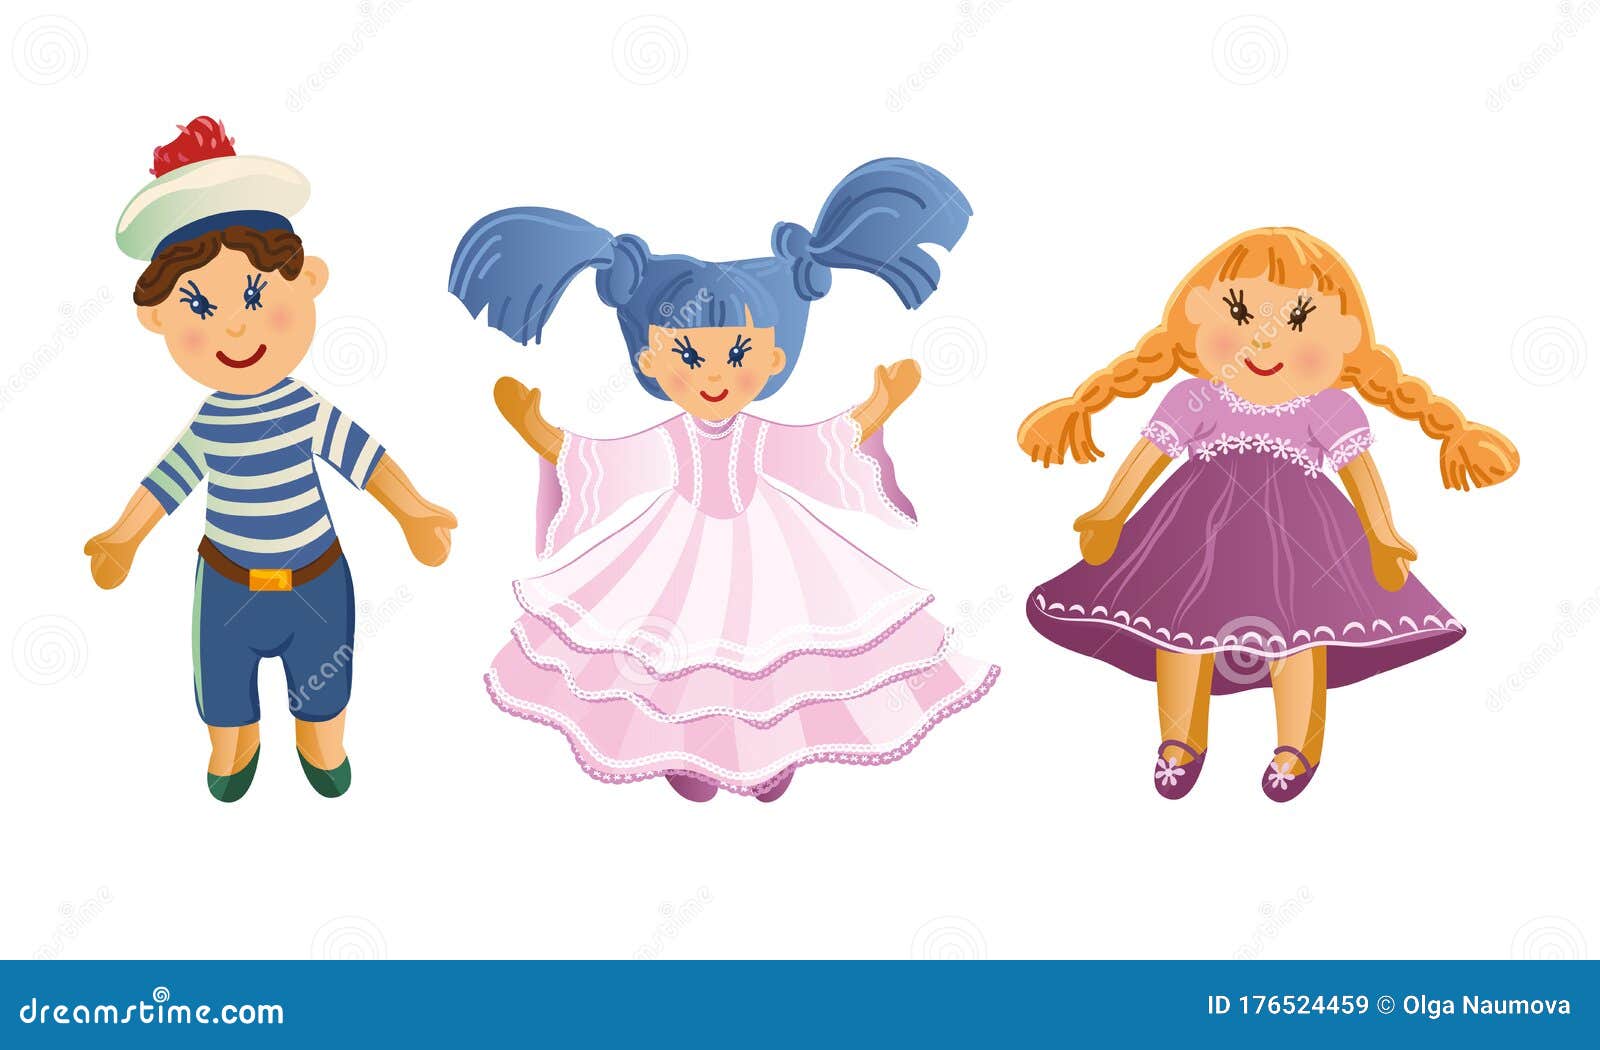 Set of Cute Baby Dolls in Different Clothes and with Varied Hairstyles  Vector Illustration in Flat Cartoon Style Stock Vector  Illustration of  jeans braid 176524459